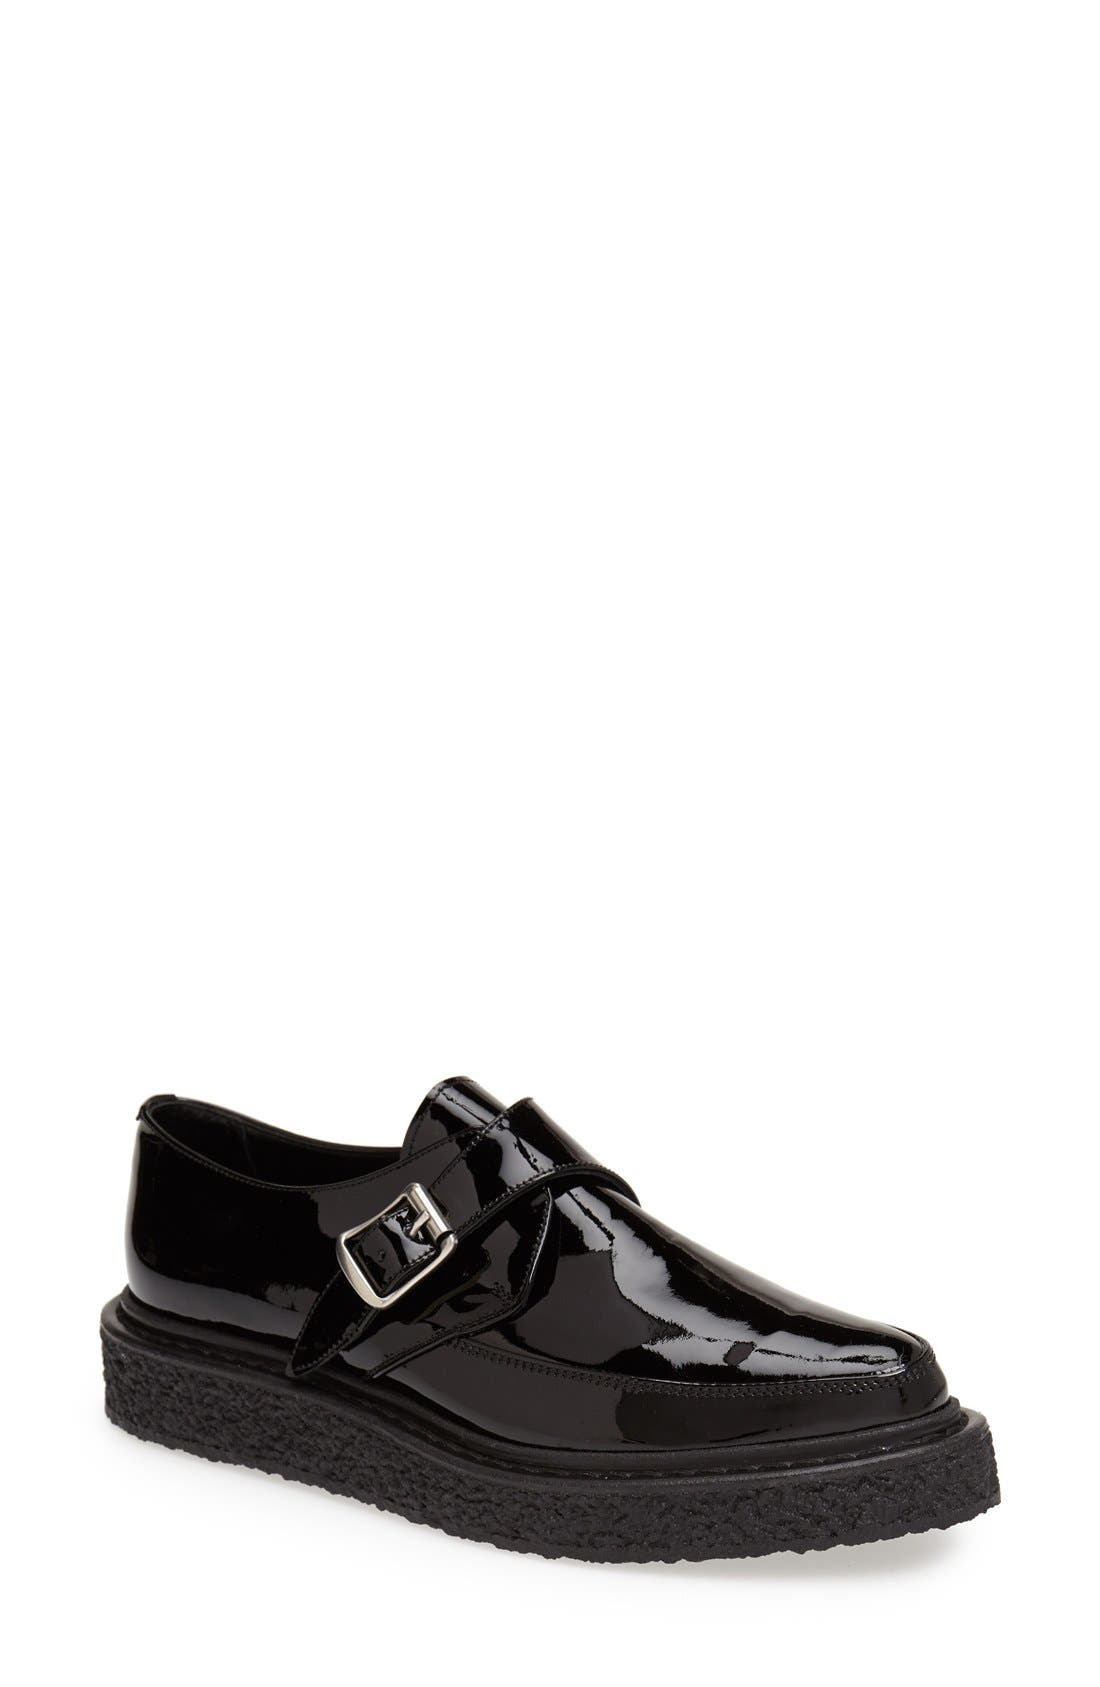 monk strap creepers